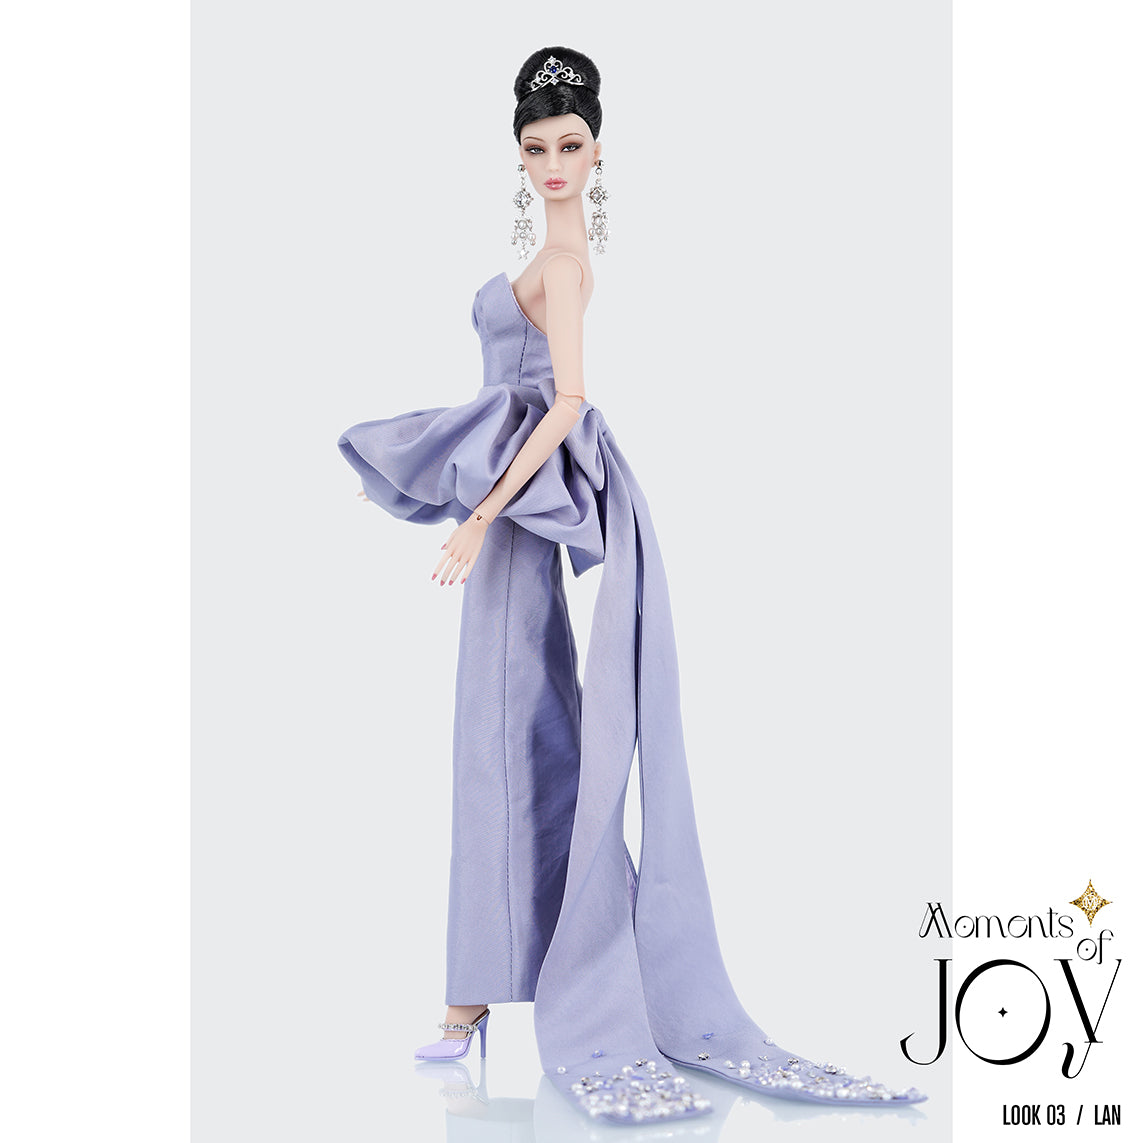 Muses Moments of Joy Fashion Look 3